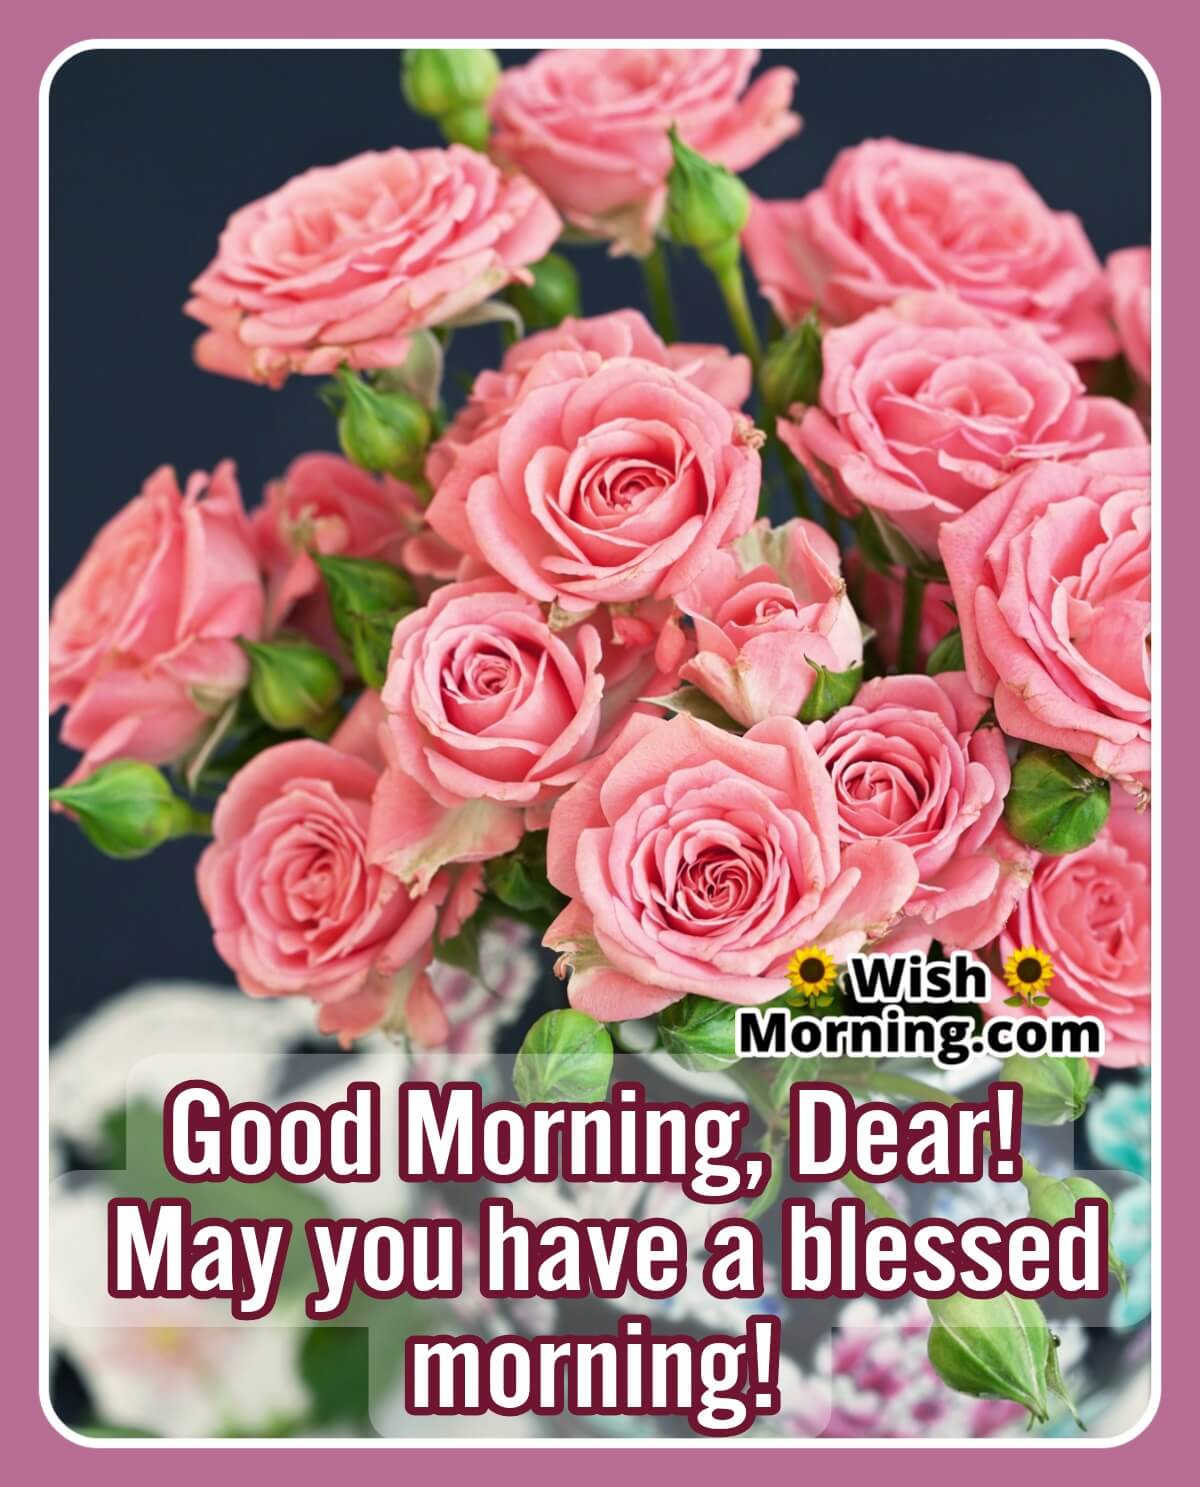 Good Morning Blessing With Rose Flowers